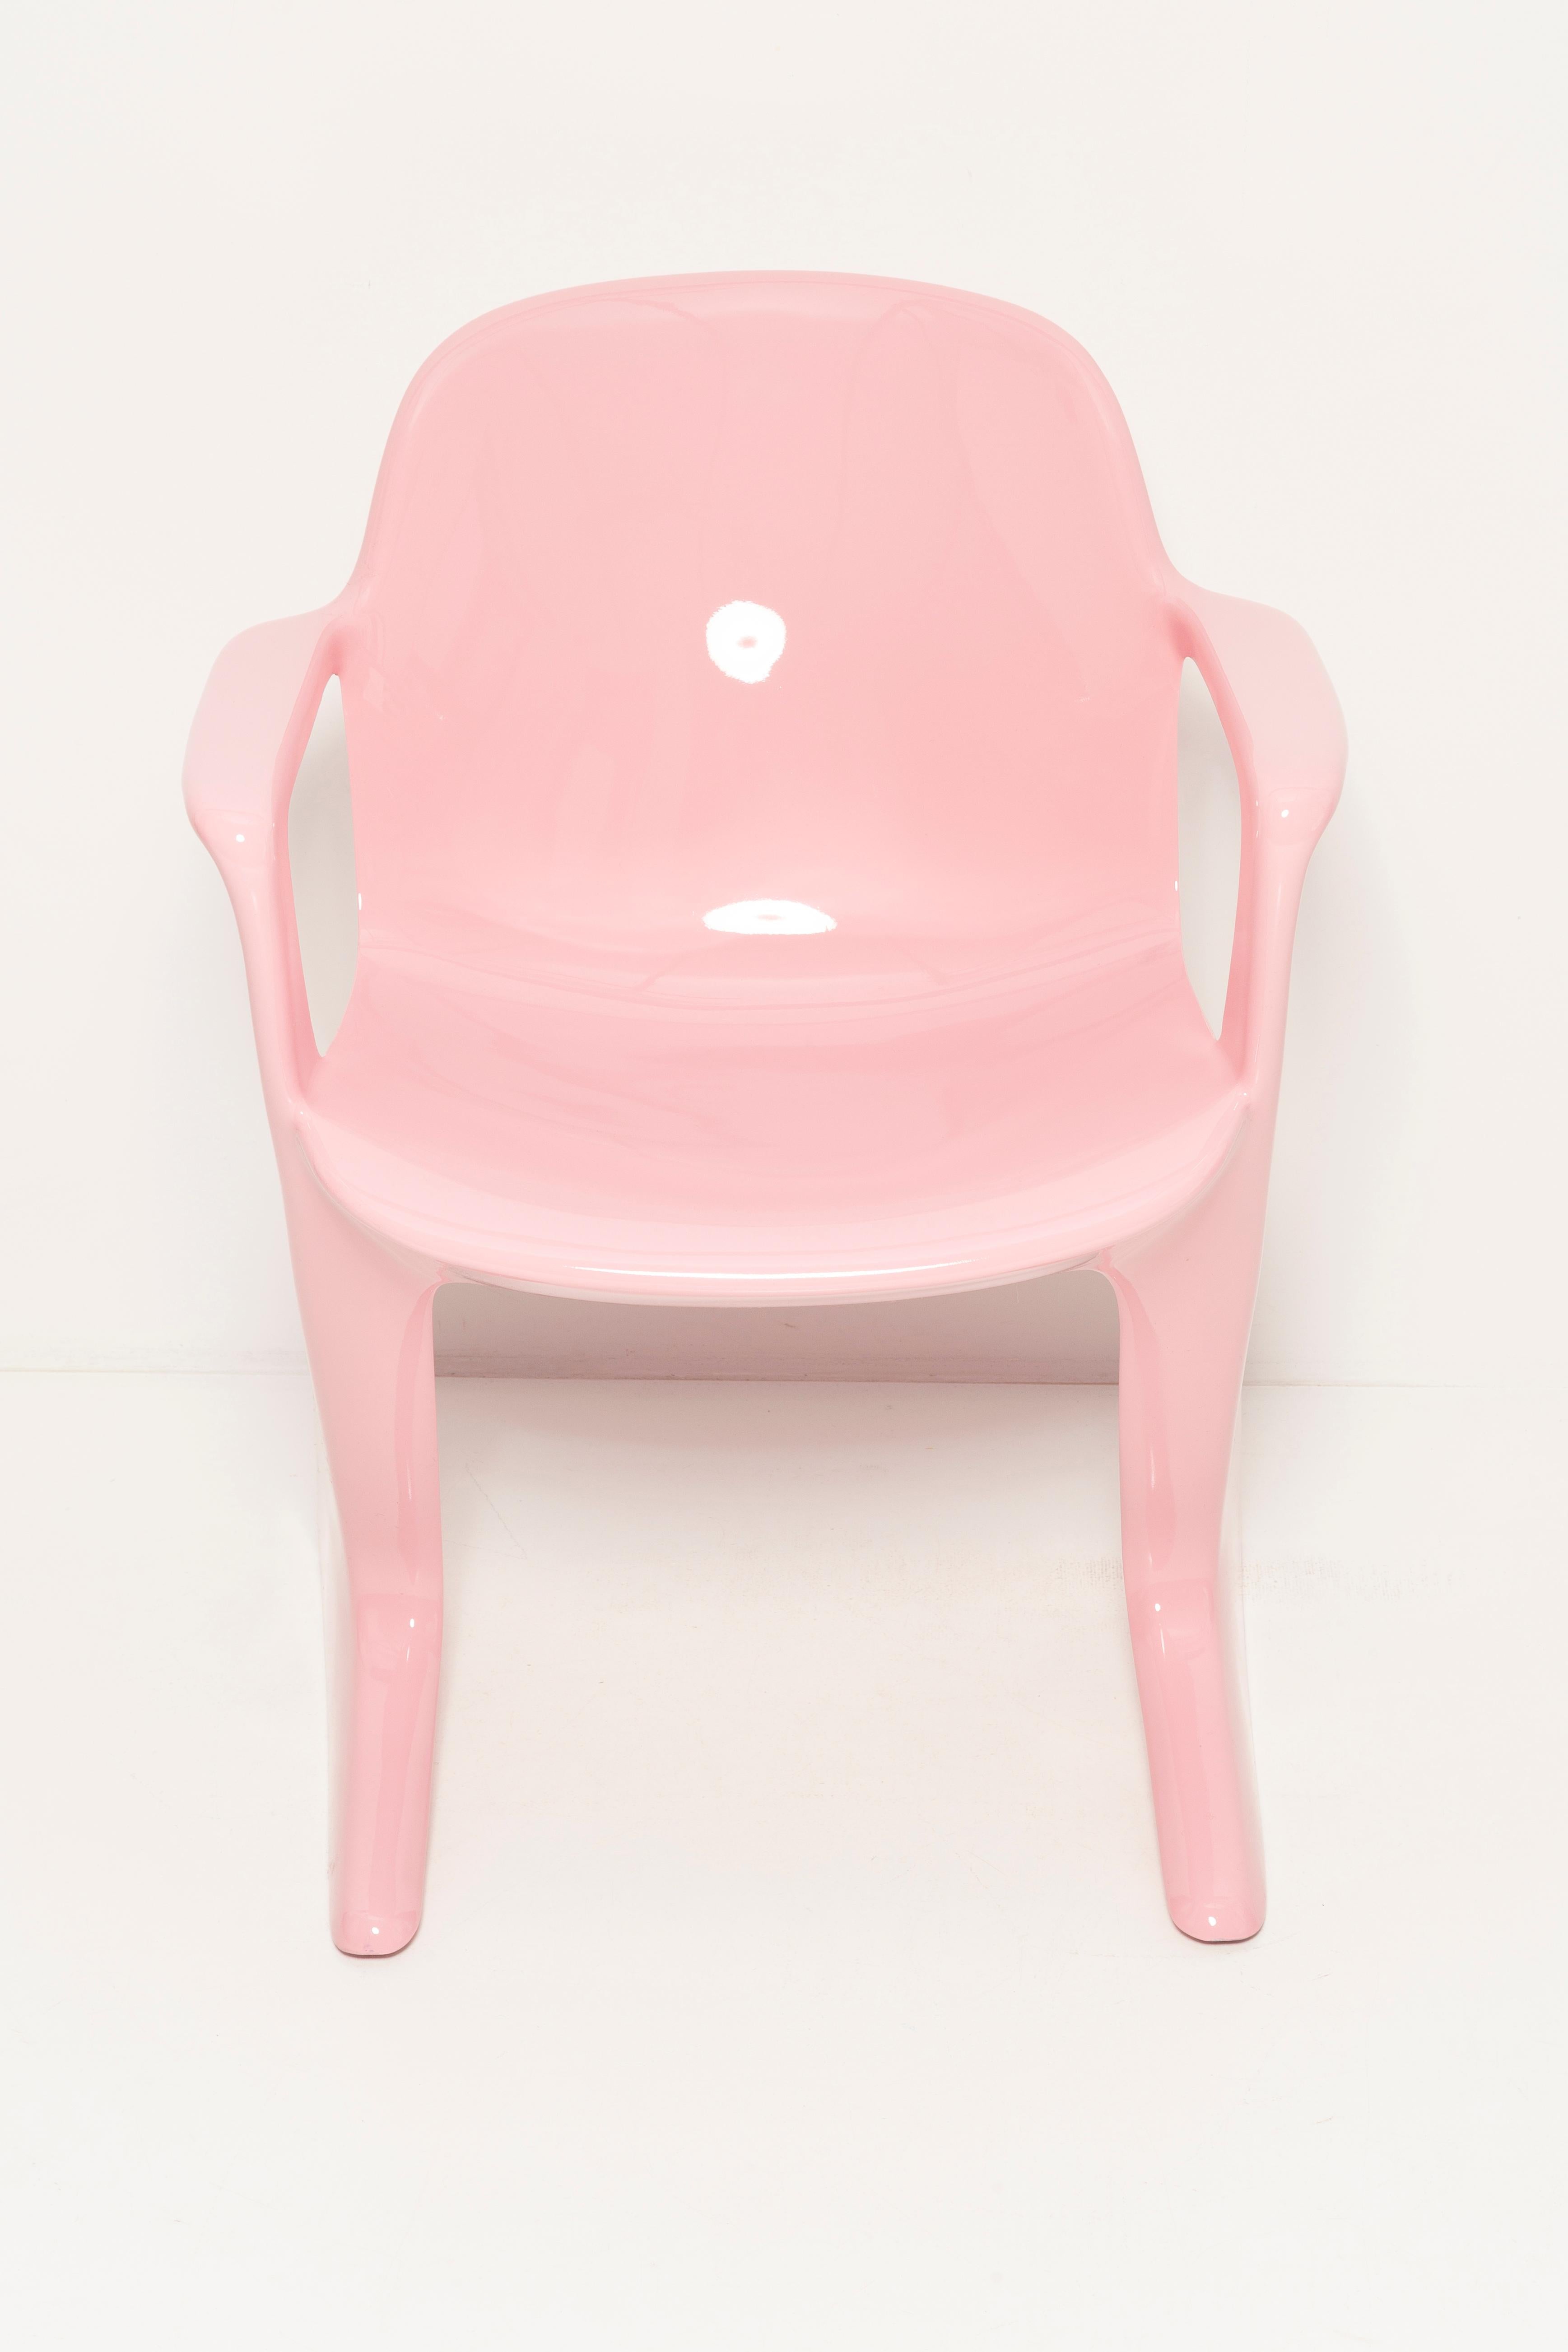 Set of Six Midcentury Pink Kangaroo Chairs, Ernst Moeckl, Germany, 1960s For Sale 5